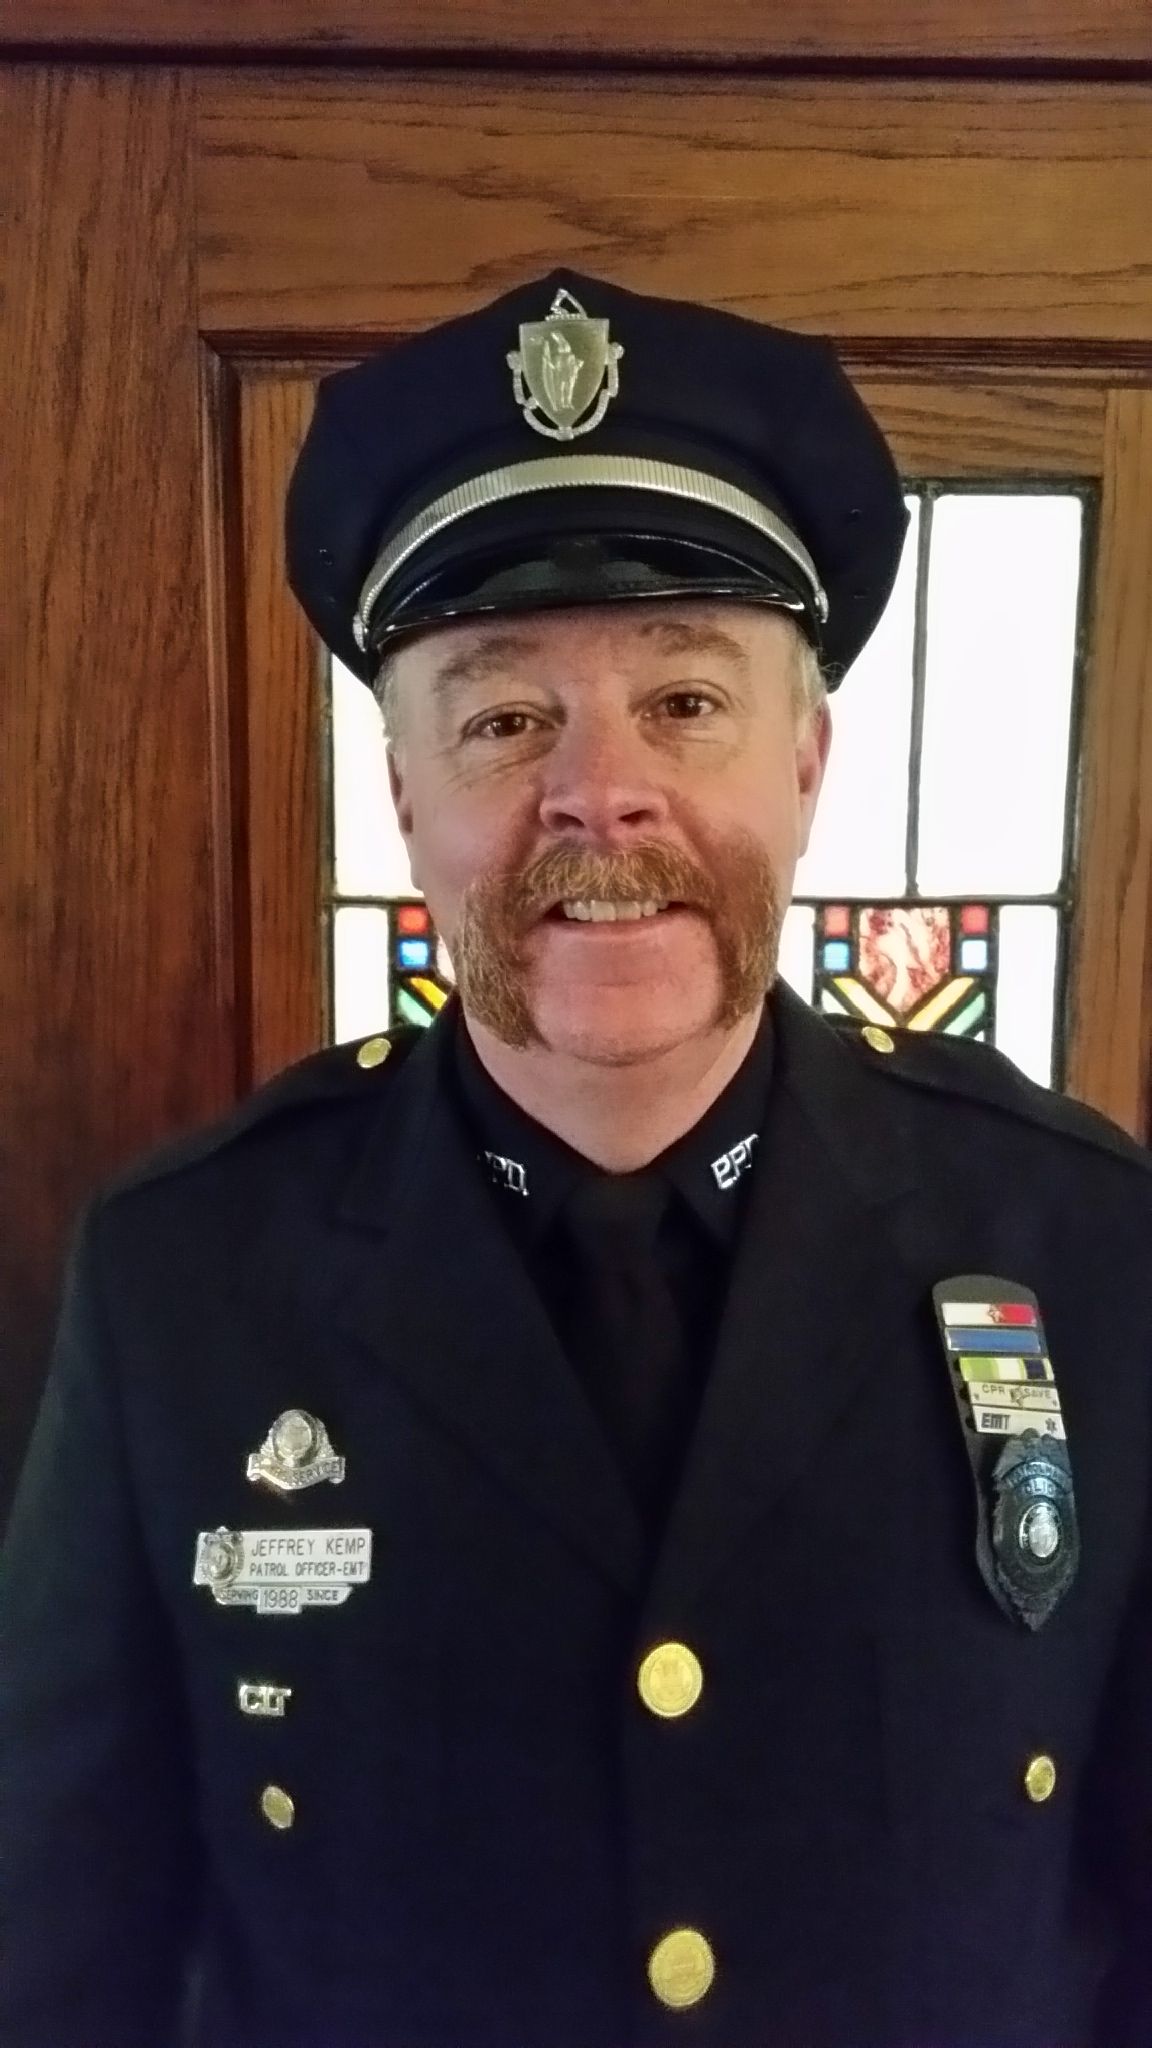 A police officer in uniform